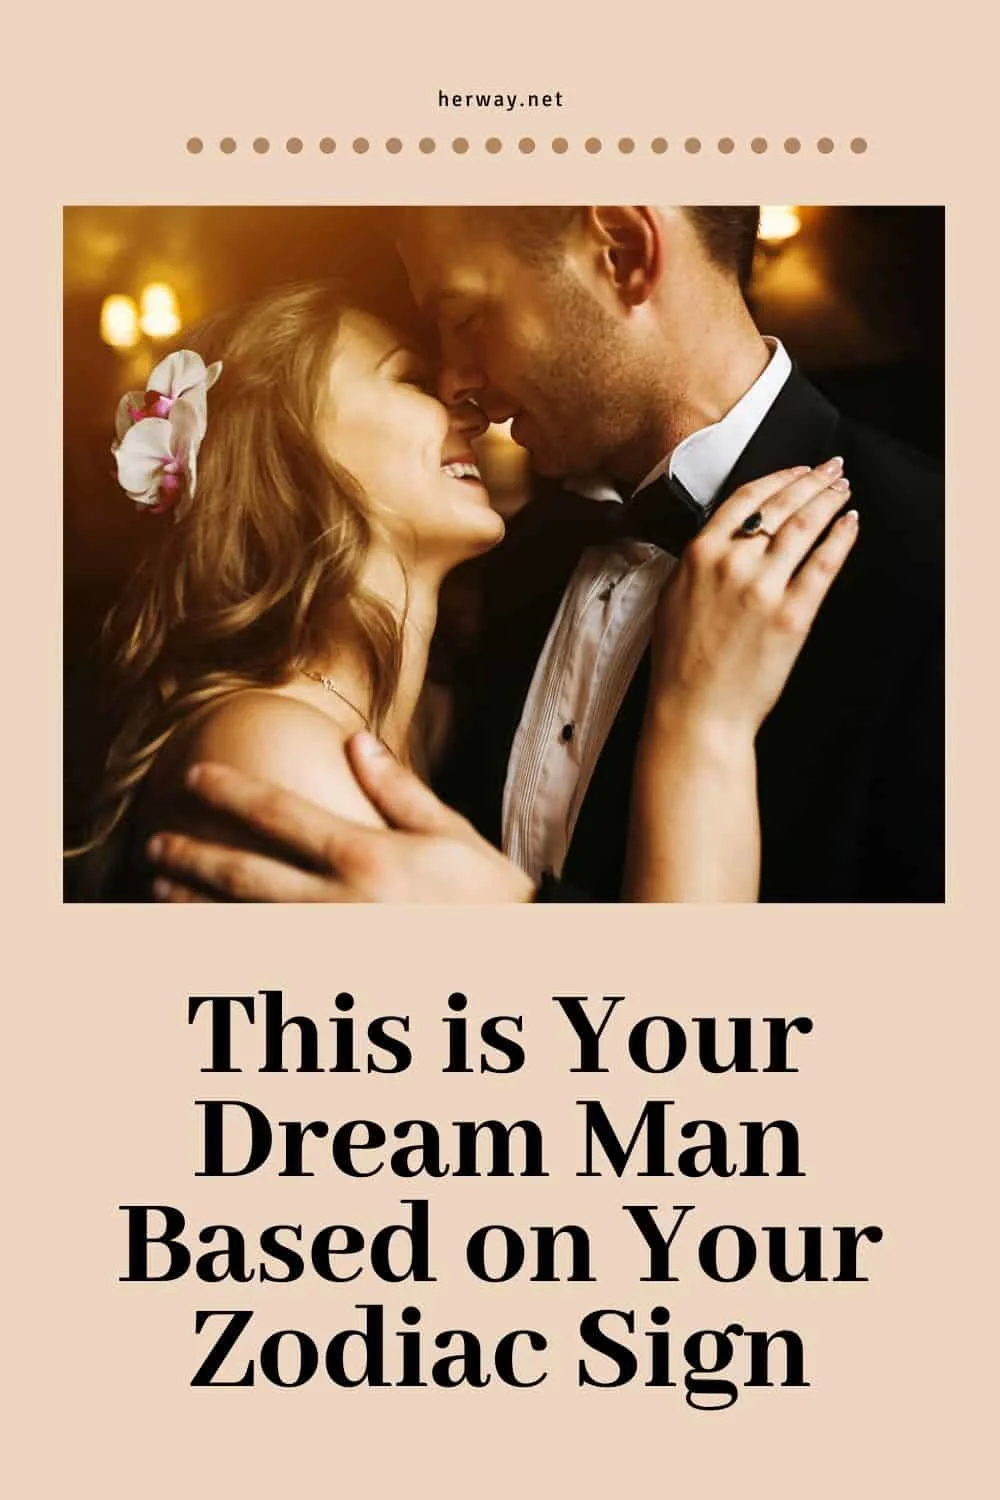 This is Your Dream Man Based on Your Zodiac Sign